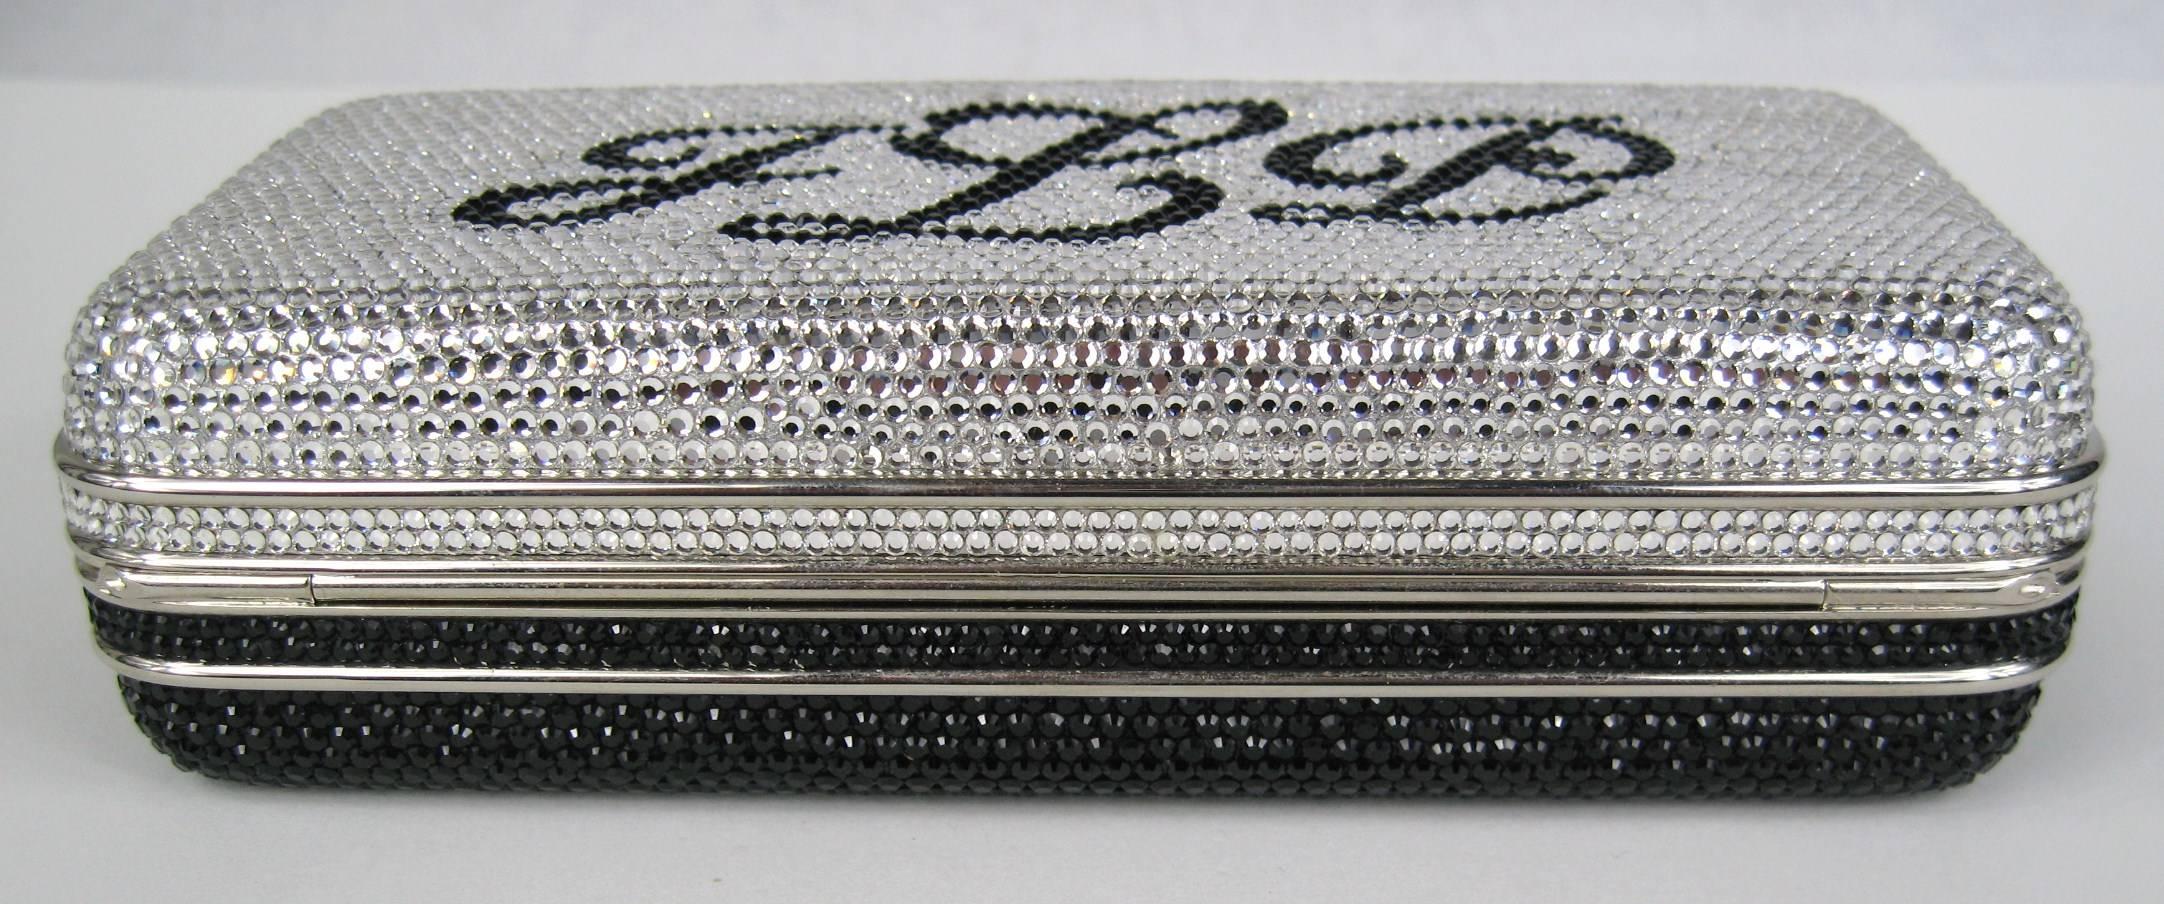 Judith Leiber JLP Minaudiere Clutch Double sided Black Silver New with Tag For Sale 3